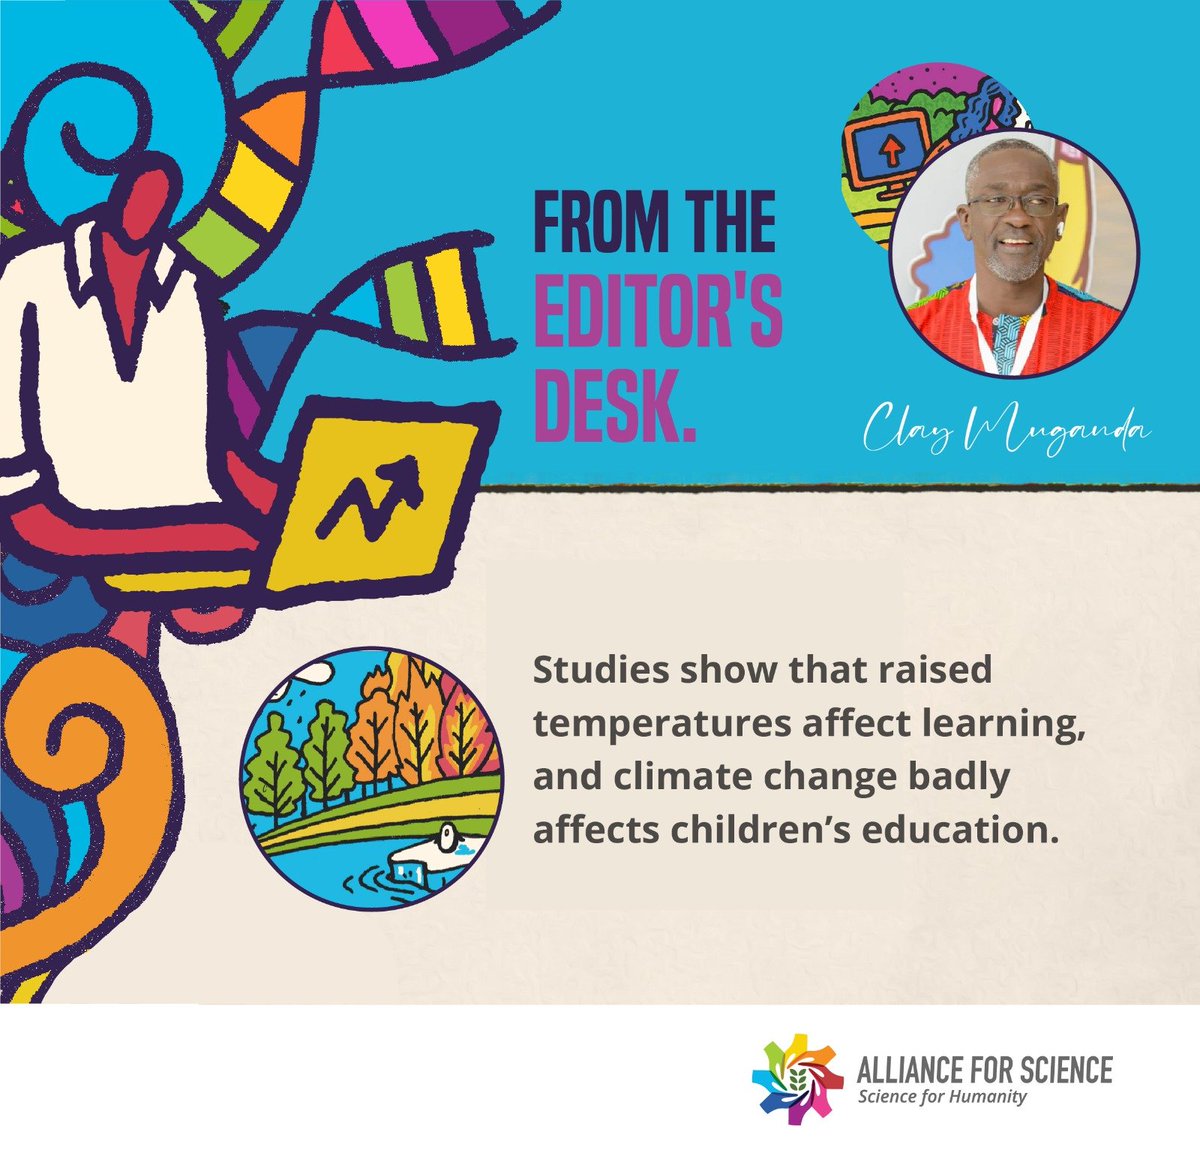 #ScienceWednesdays We are back - with more insightful articles. Check out the latest story from the Editor's Desk. How #climatechange is badly affecting children’s #education Read more... t.ly/q9d-a @SheilaAfrica @mqhlay